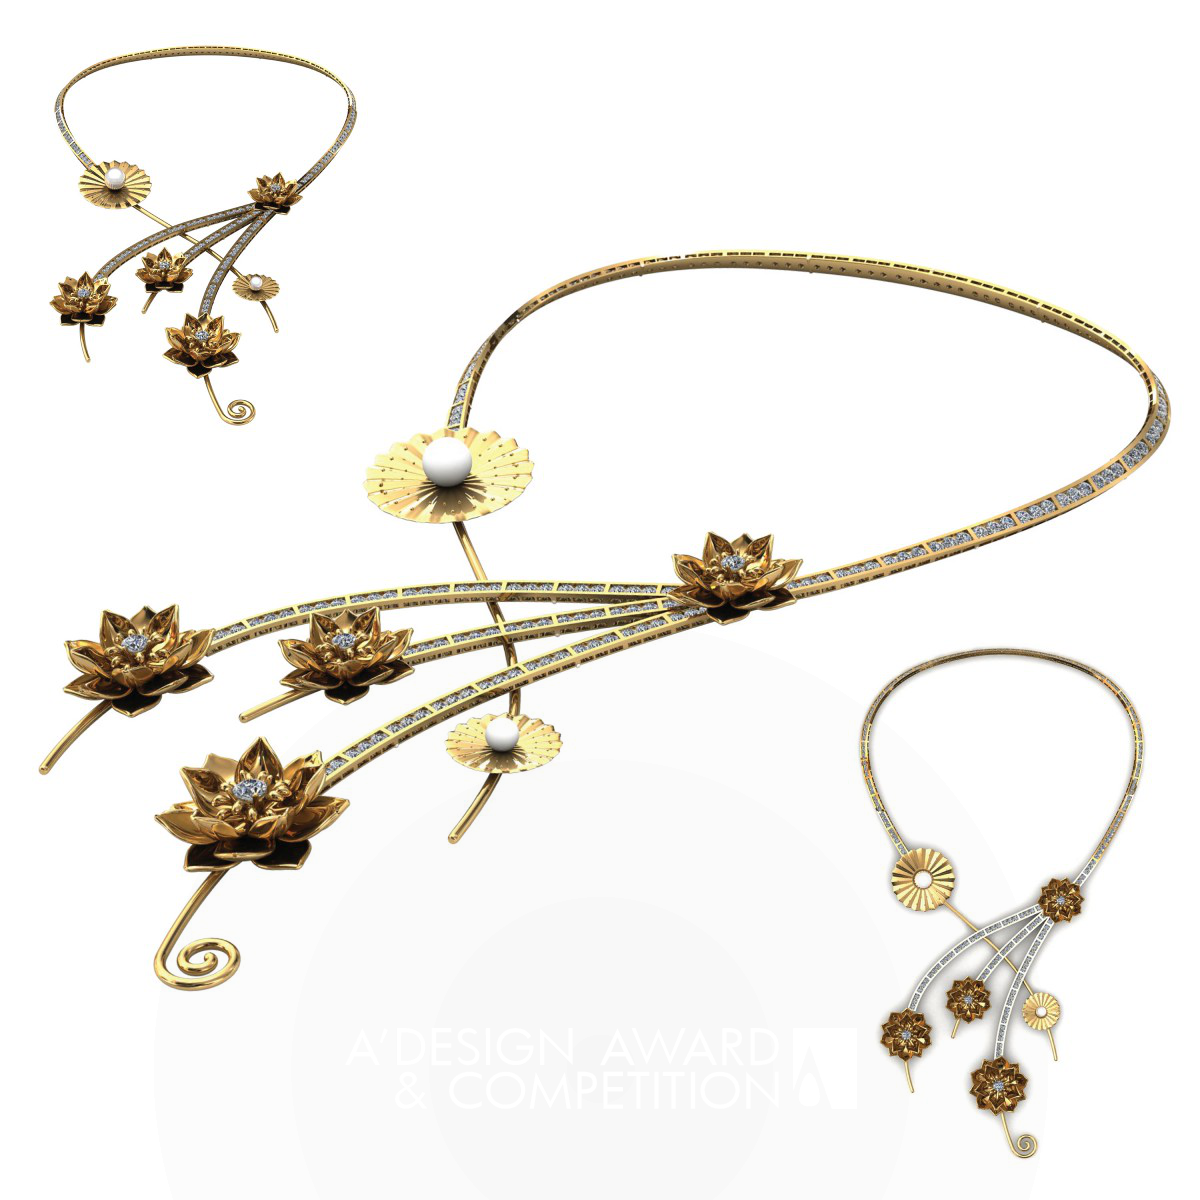 Lotus 1 Realism Collection Lotus Rings, Earrings and Necklaces by Way TAY